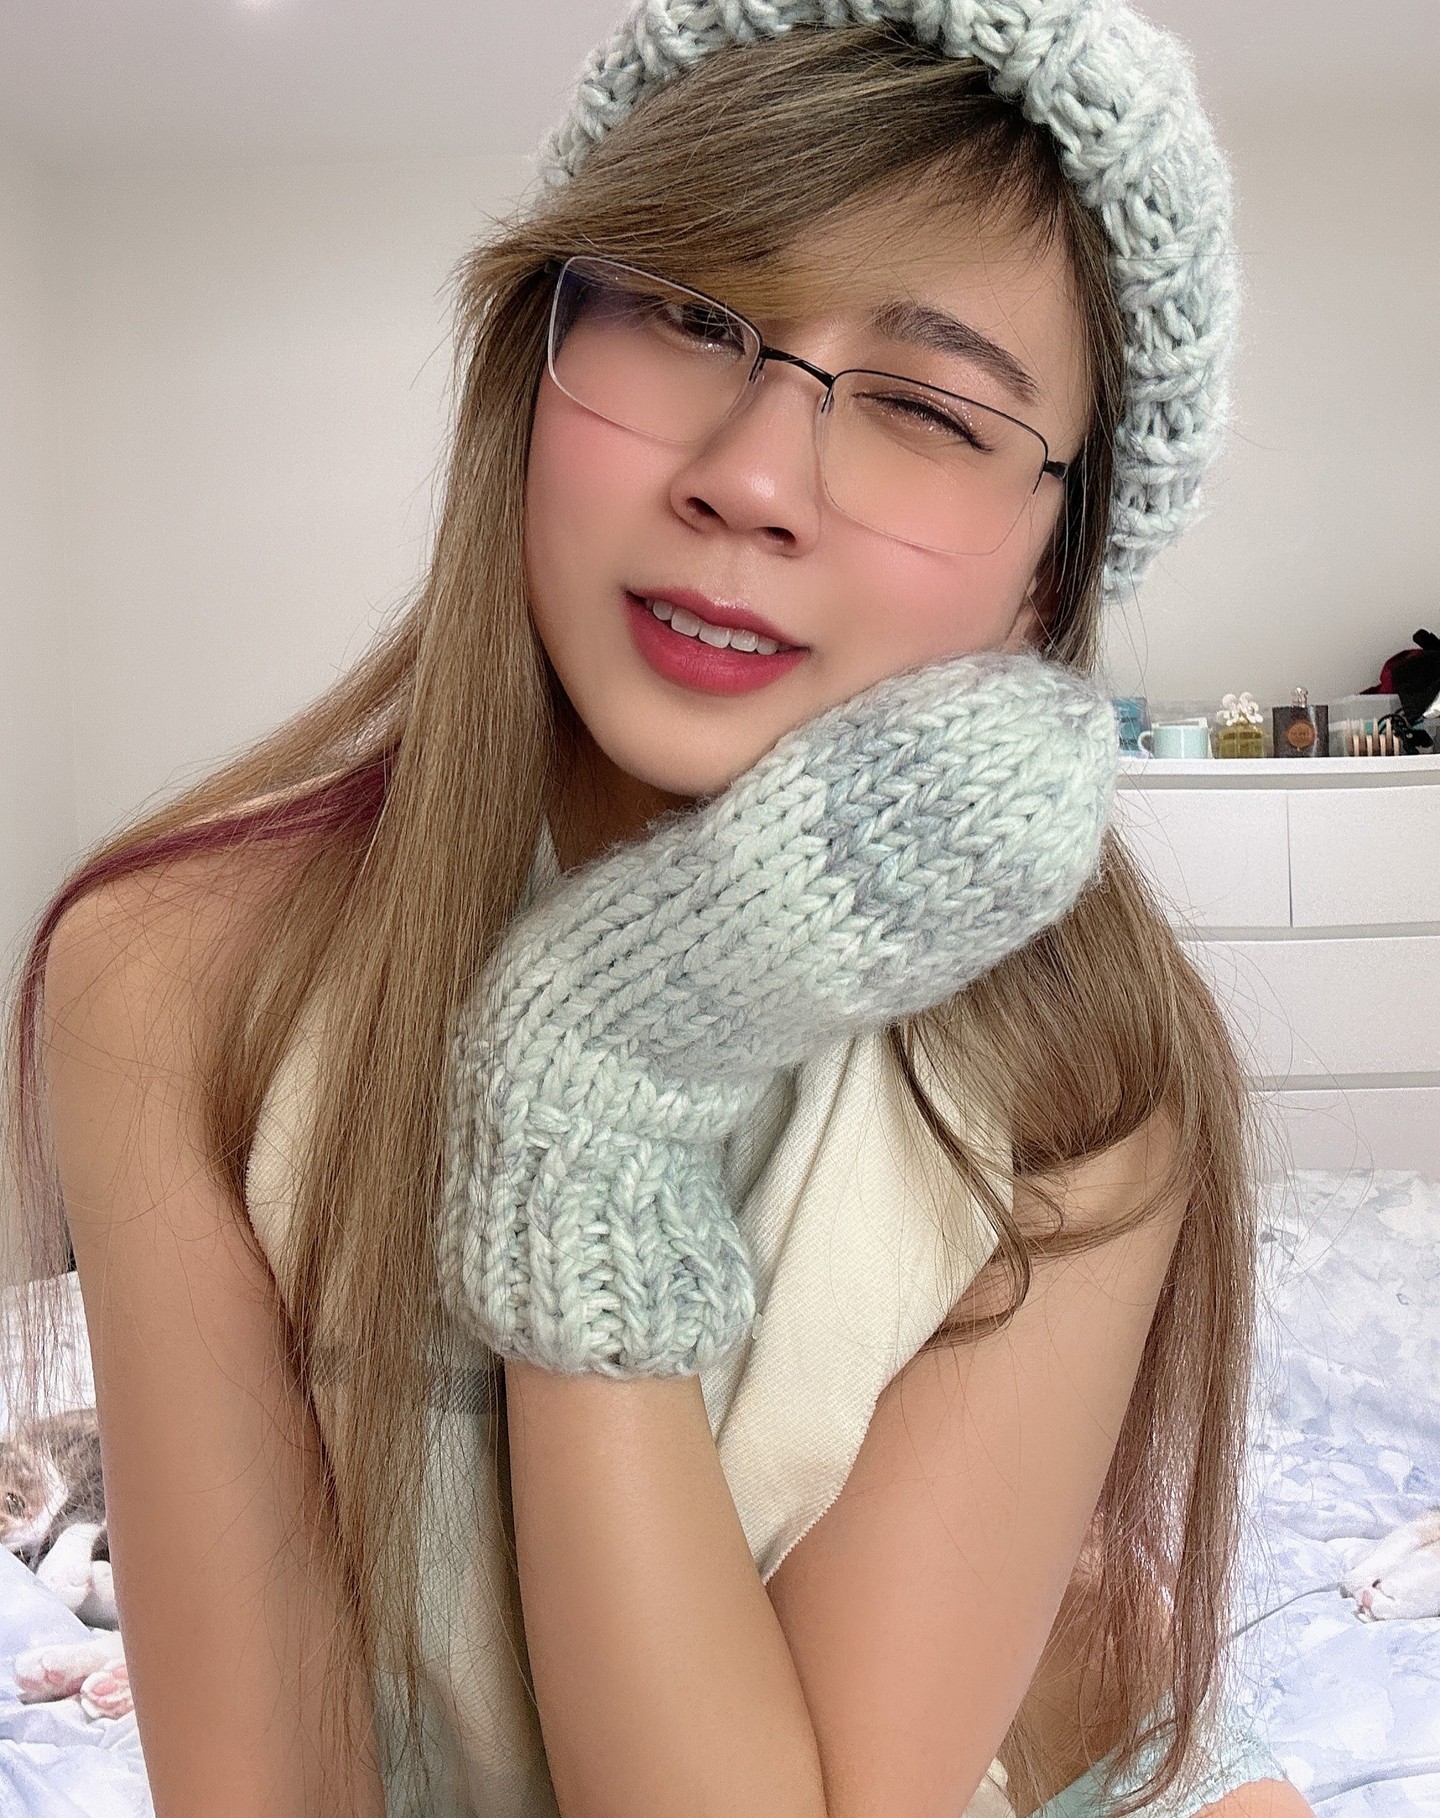 its getting warmer so...less layers right? 
-
Guess who's is a college graduate hehe 😊 I just finished the final few presentations last week and got back all my grades! Can finally relax & rest with no stress ^^ I almost can't believe it's over LOL

Honestly I only just started attending in person classes last fall so it doesn't feel like I was 'in school' for very long ahaha 90% of my college experience ended up being online (thanks a lot panoramic) 😅 Def made it easier and more convenient but it sucked that I didn't get that traditional college experience 😞..... OH WELL 🤷‍♀️ NOT LOOKING BACK LMAO NOPE 🙅‍♀️ PEACE OUT ✌ these group projects have scarred me for life 😩
-
What was your college or university experience like?